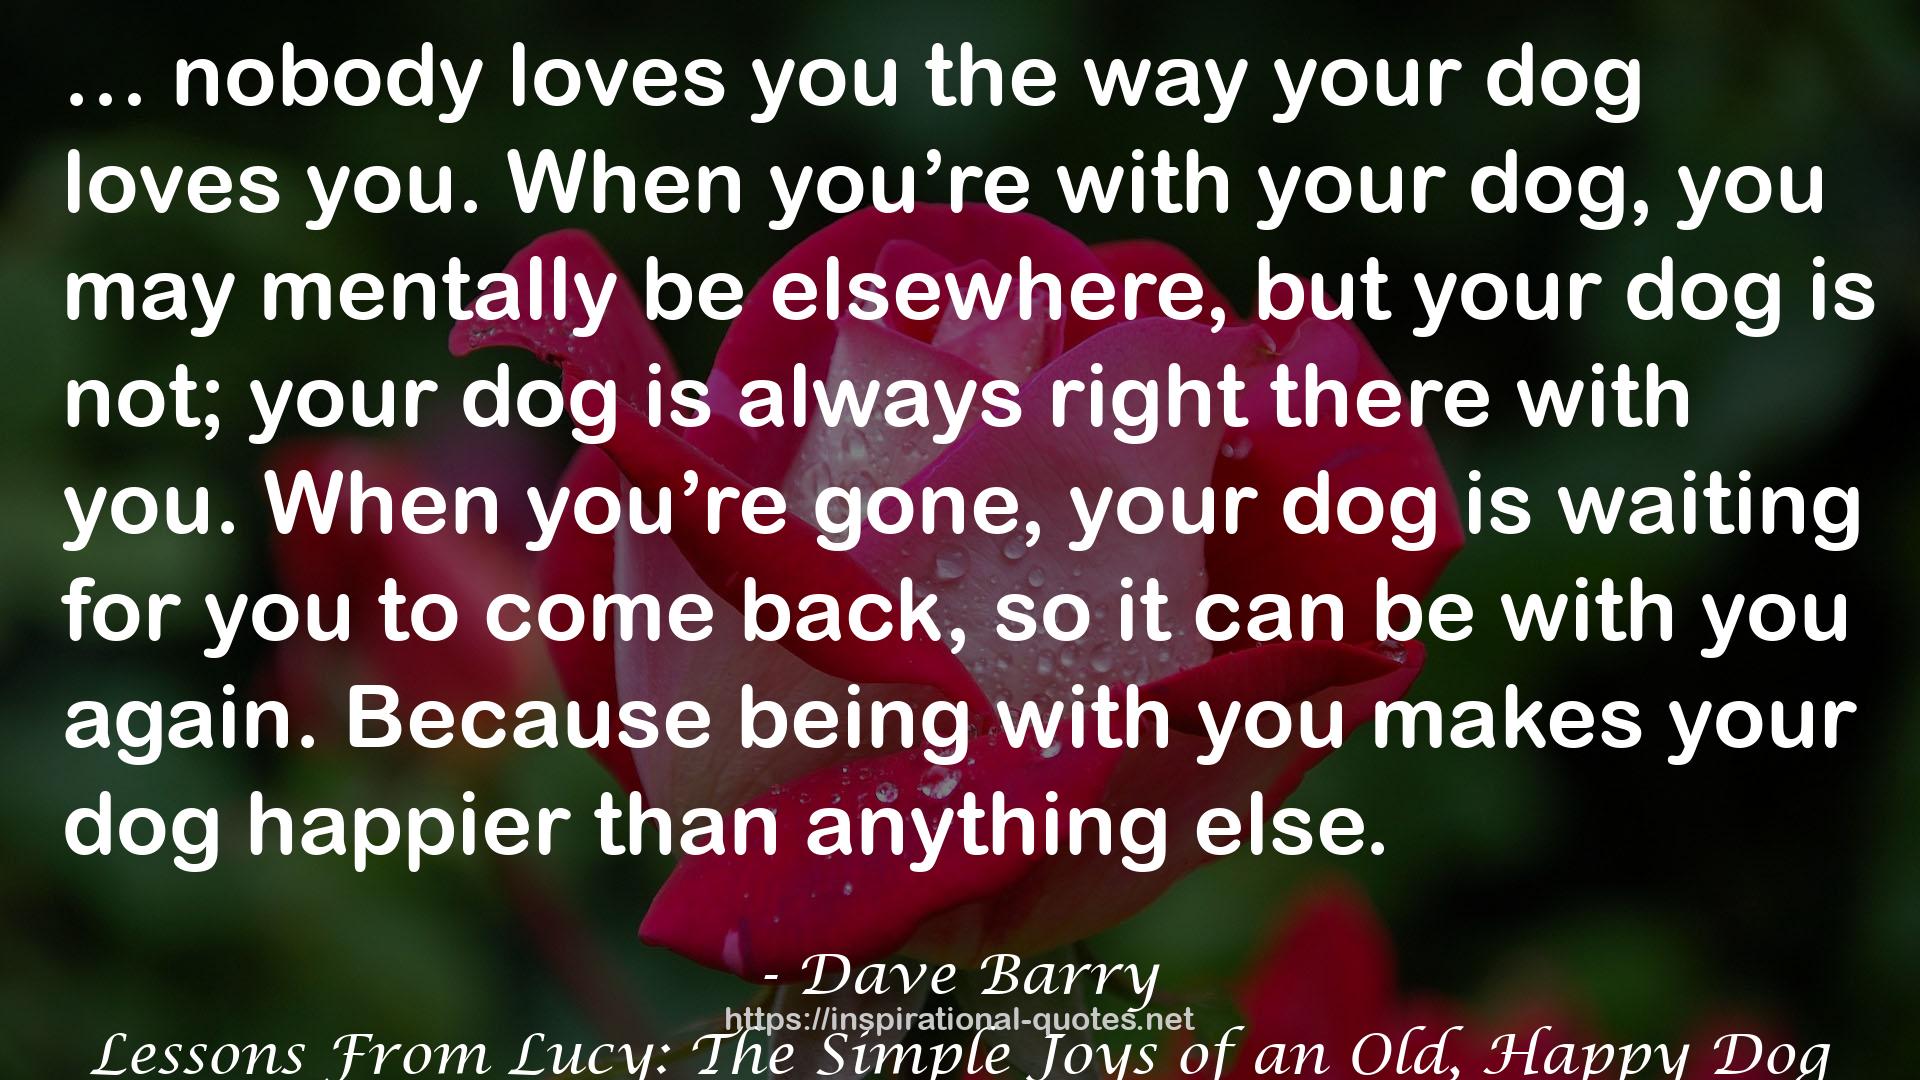 Lessons From Lucy: The Simple Joys of an Old, Happy Dog QUOTES